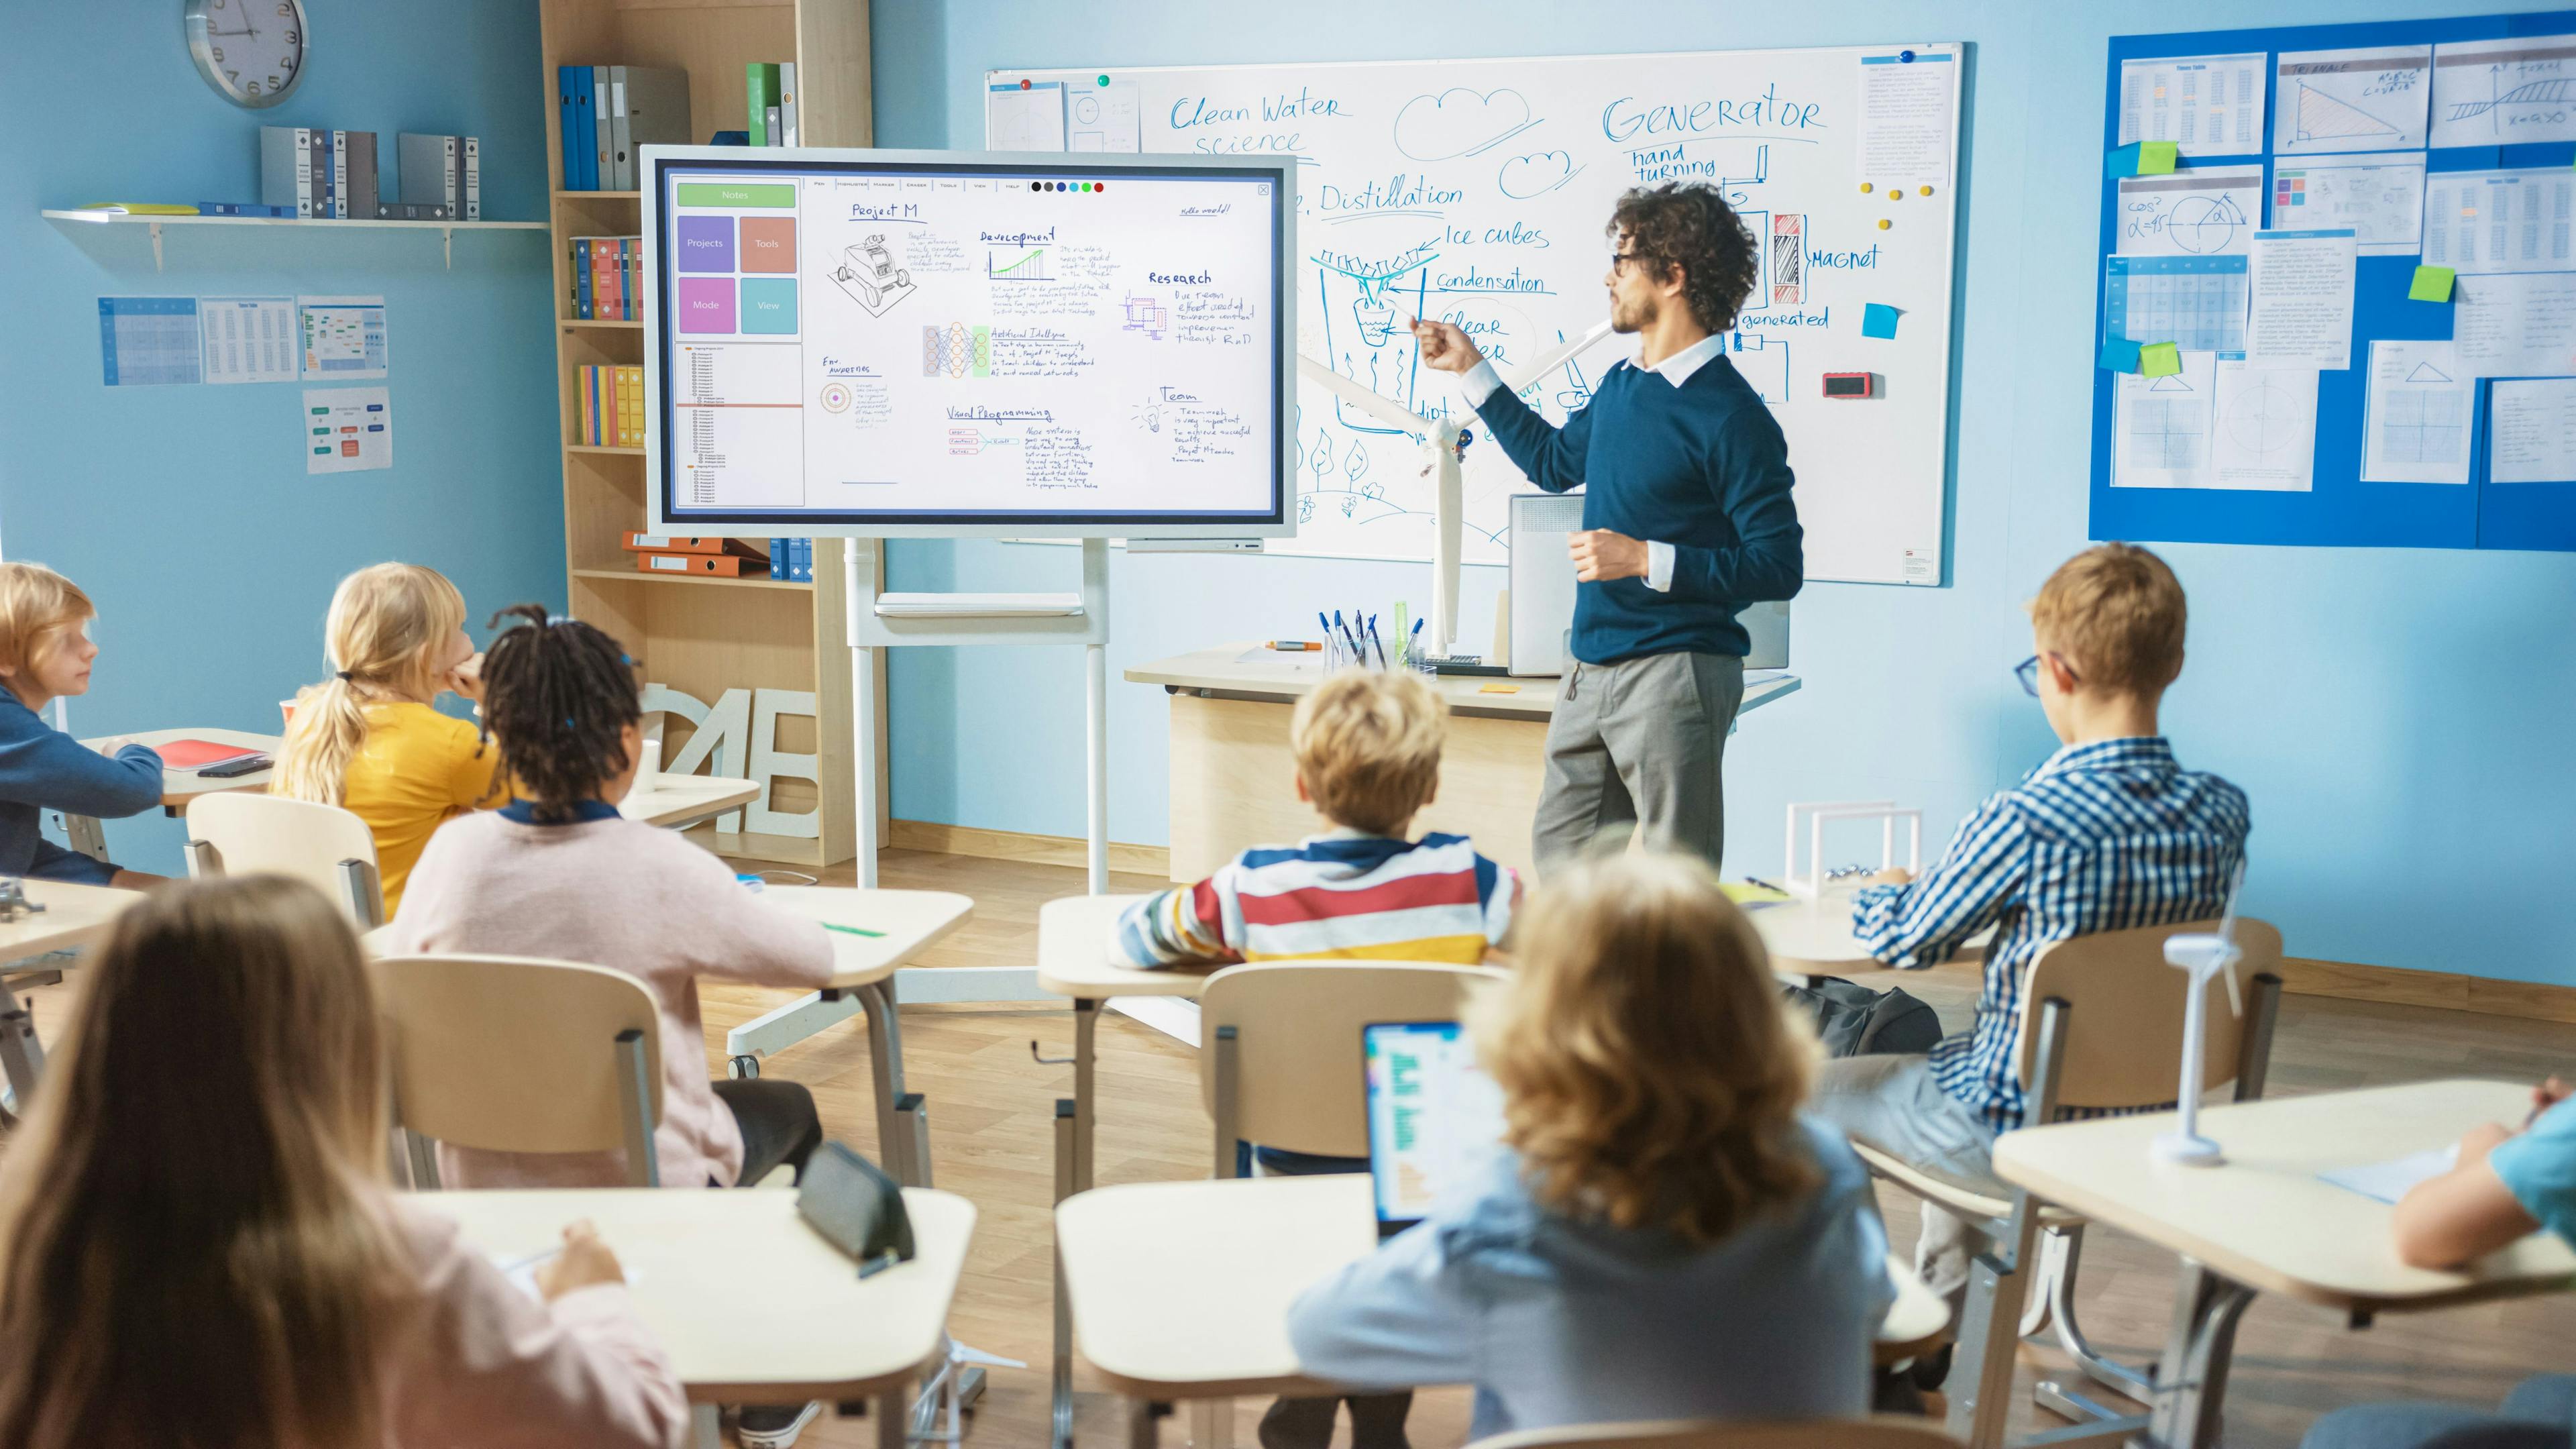 Interactive screen installation in a classroom